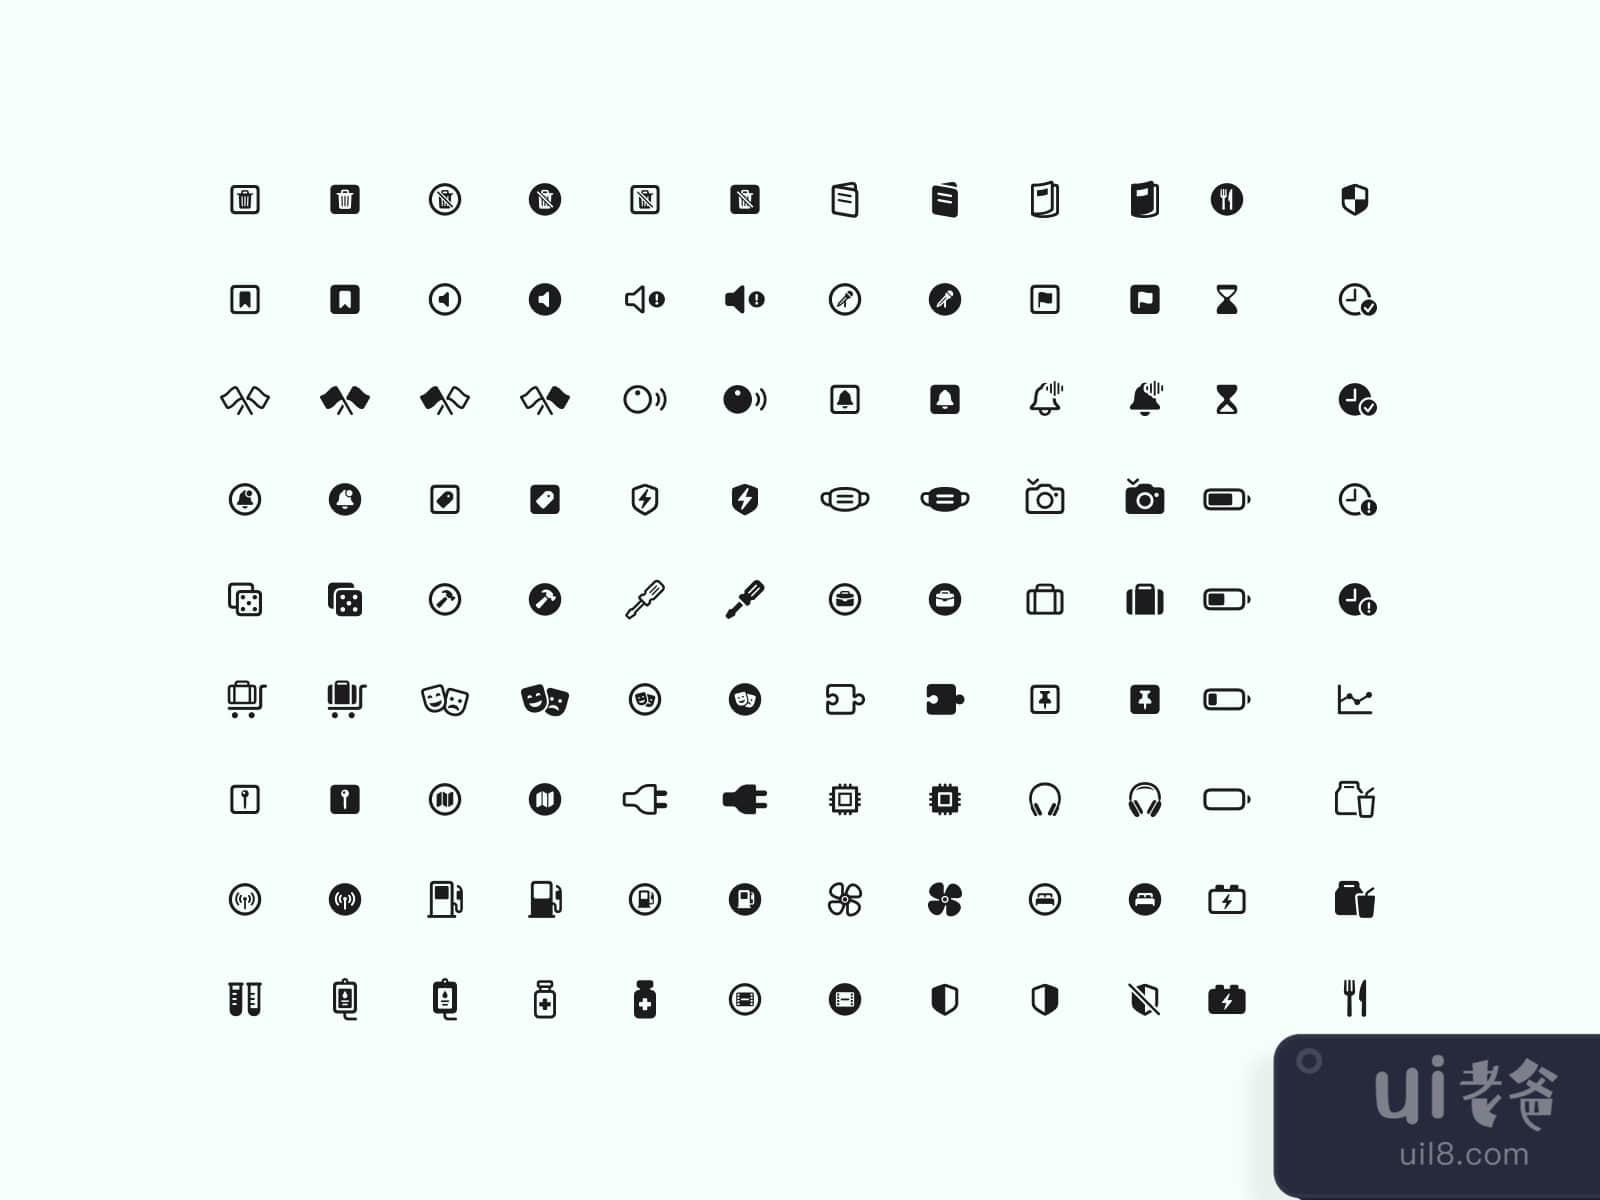 SF Symbols 2.1 Icons for Figma and Adobe XD No 3